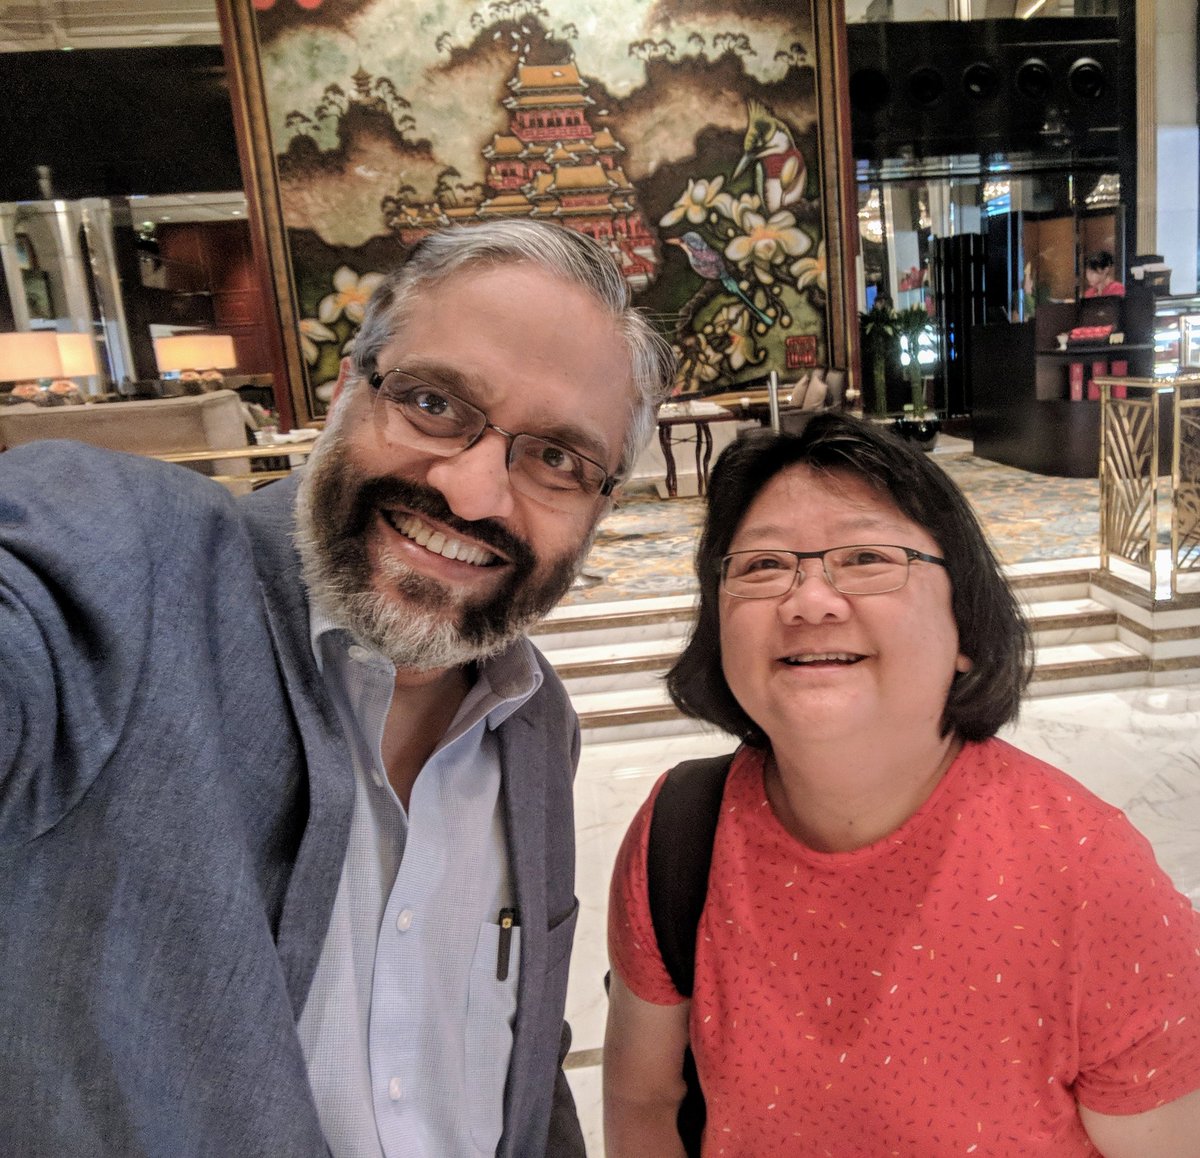 With friend and colleague Dr Chan from Kuala Lumpur at the Hong Kong meeting
#osteoporosis #fractureprevention #hongkong #AsiaPacific